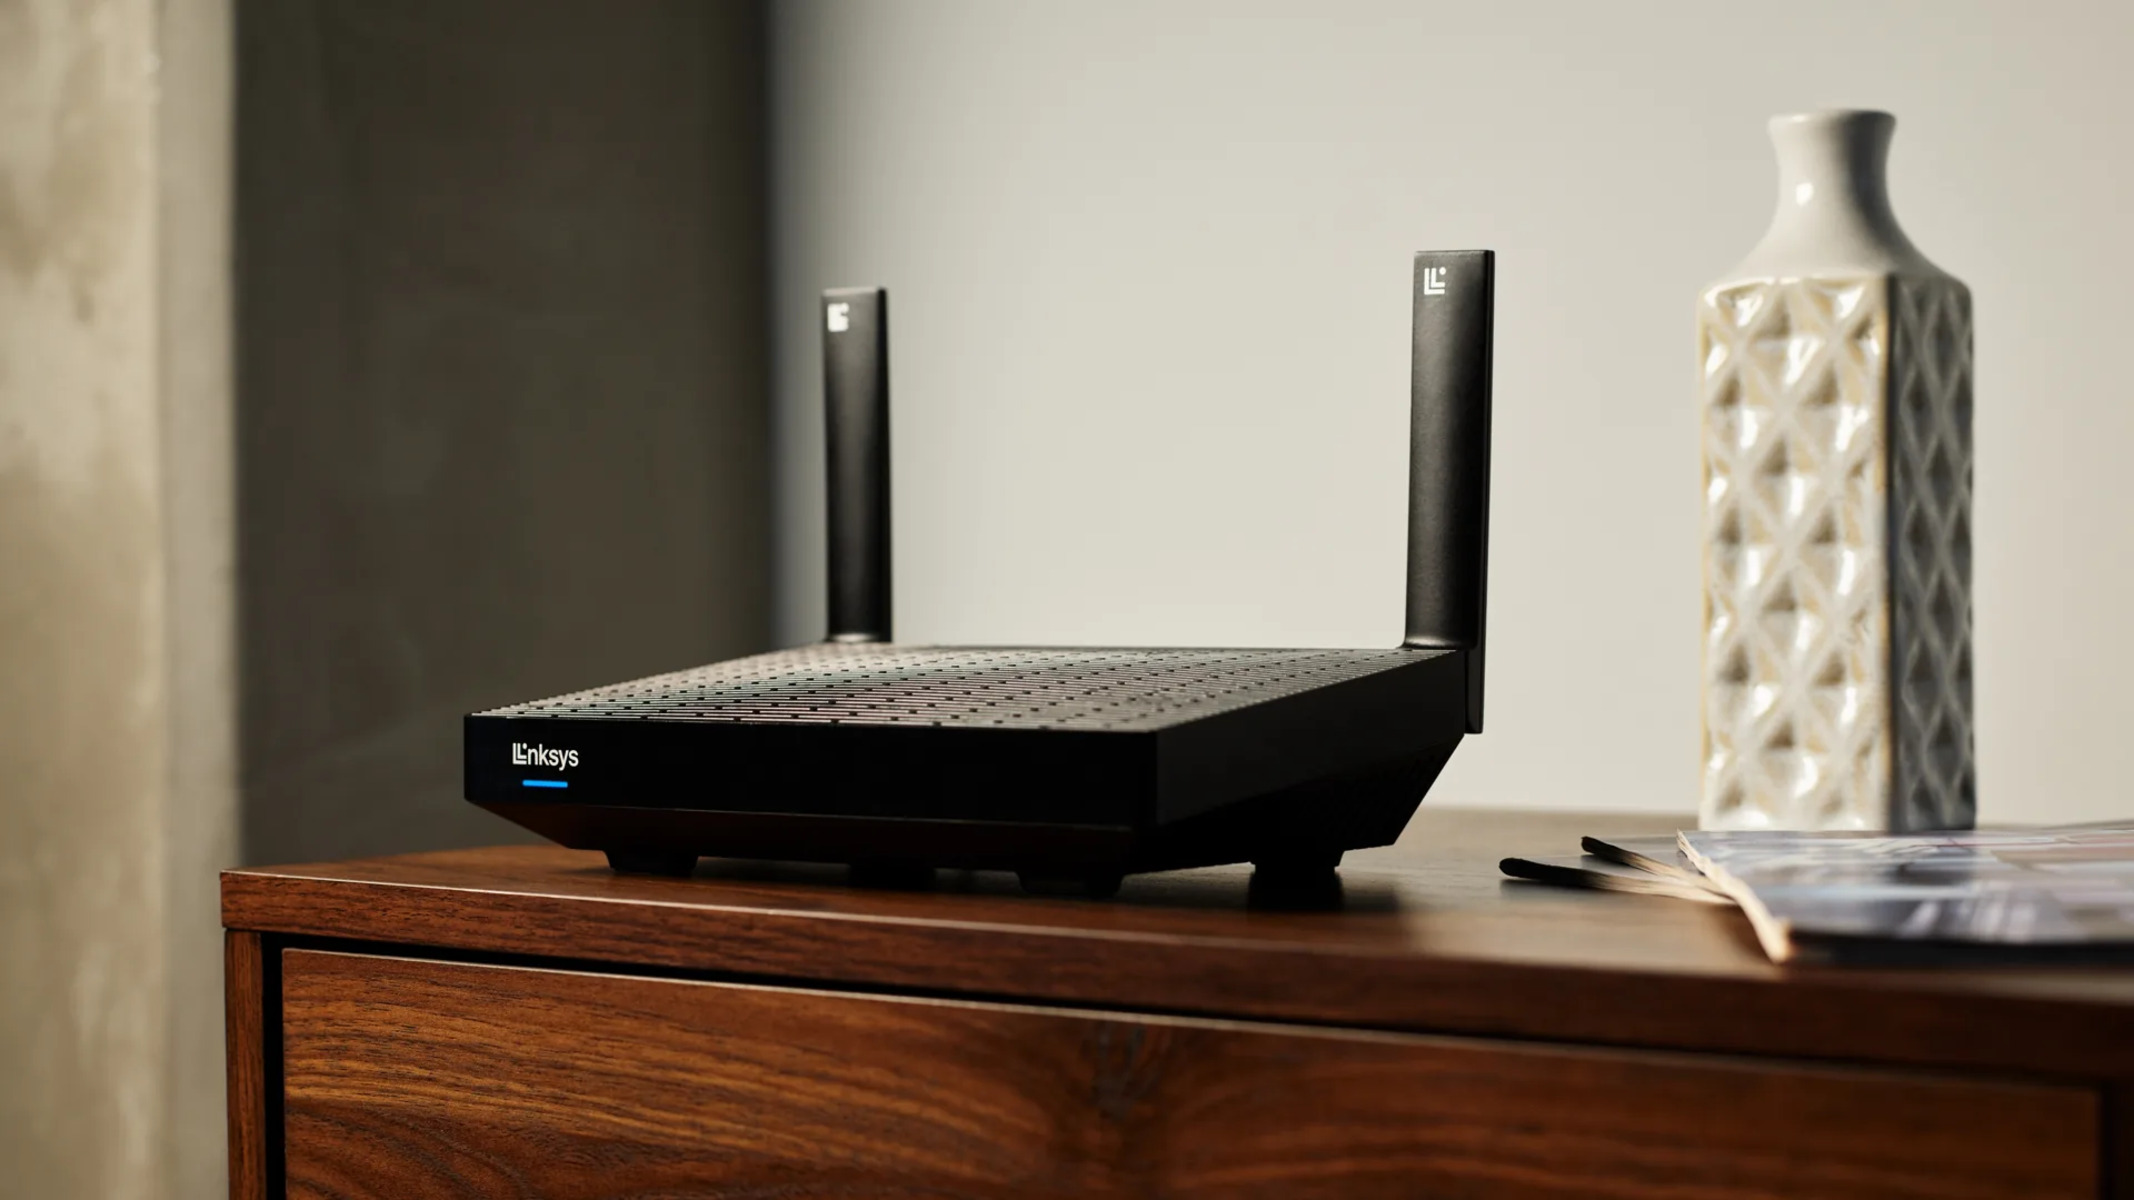 How To Secure My Linksys Wireless Router